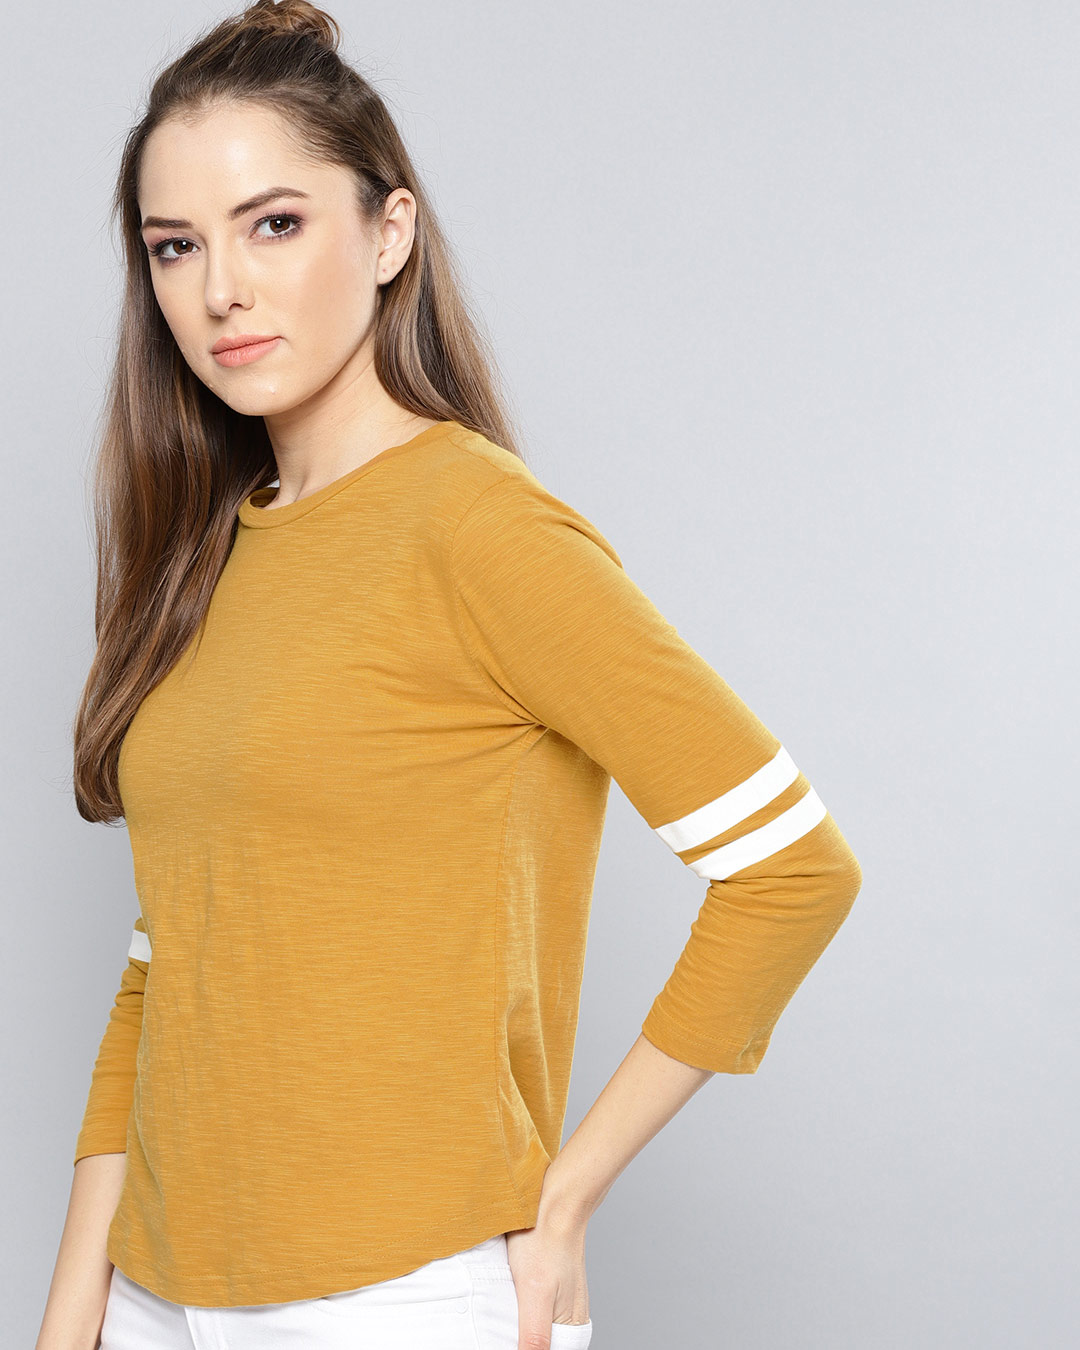 Shop Women Round Neck Three Quarter Sleeves Solid Top-Back